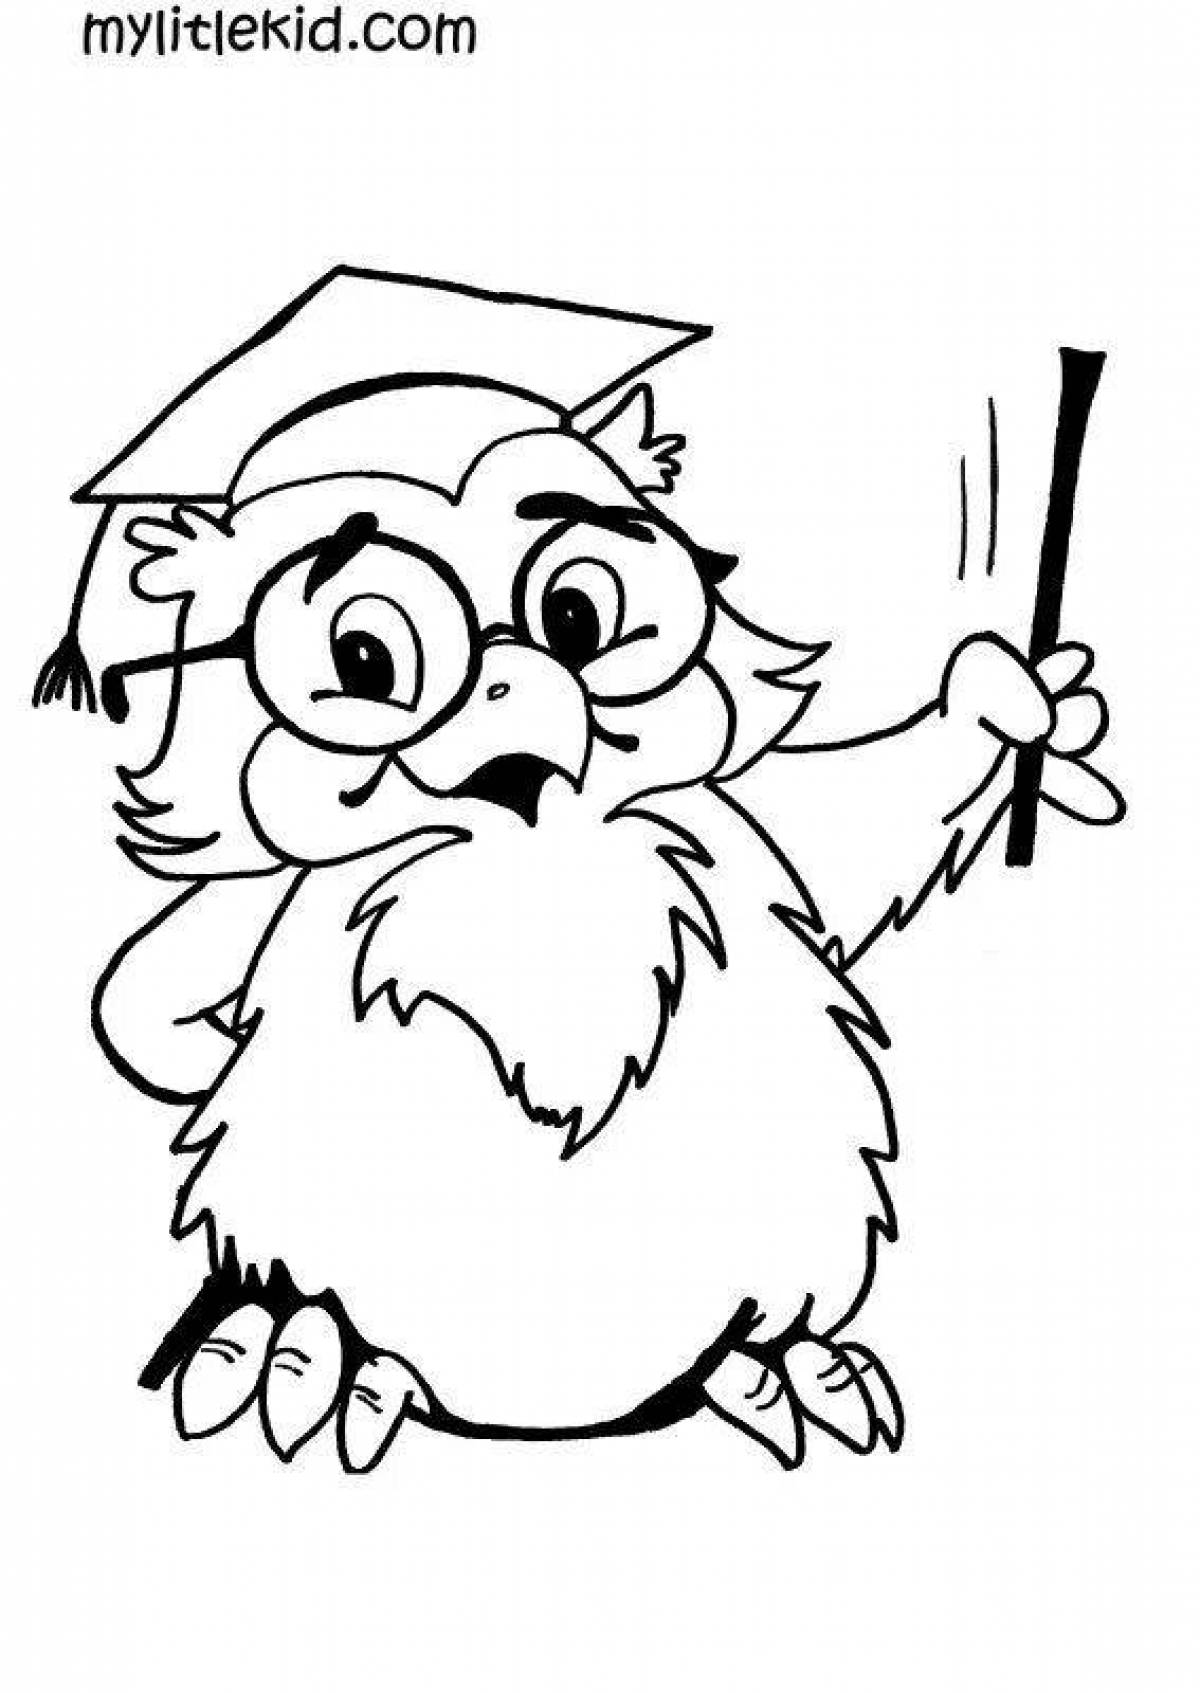 Funny smart owl coloring book